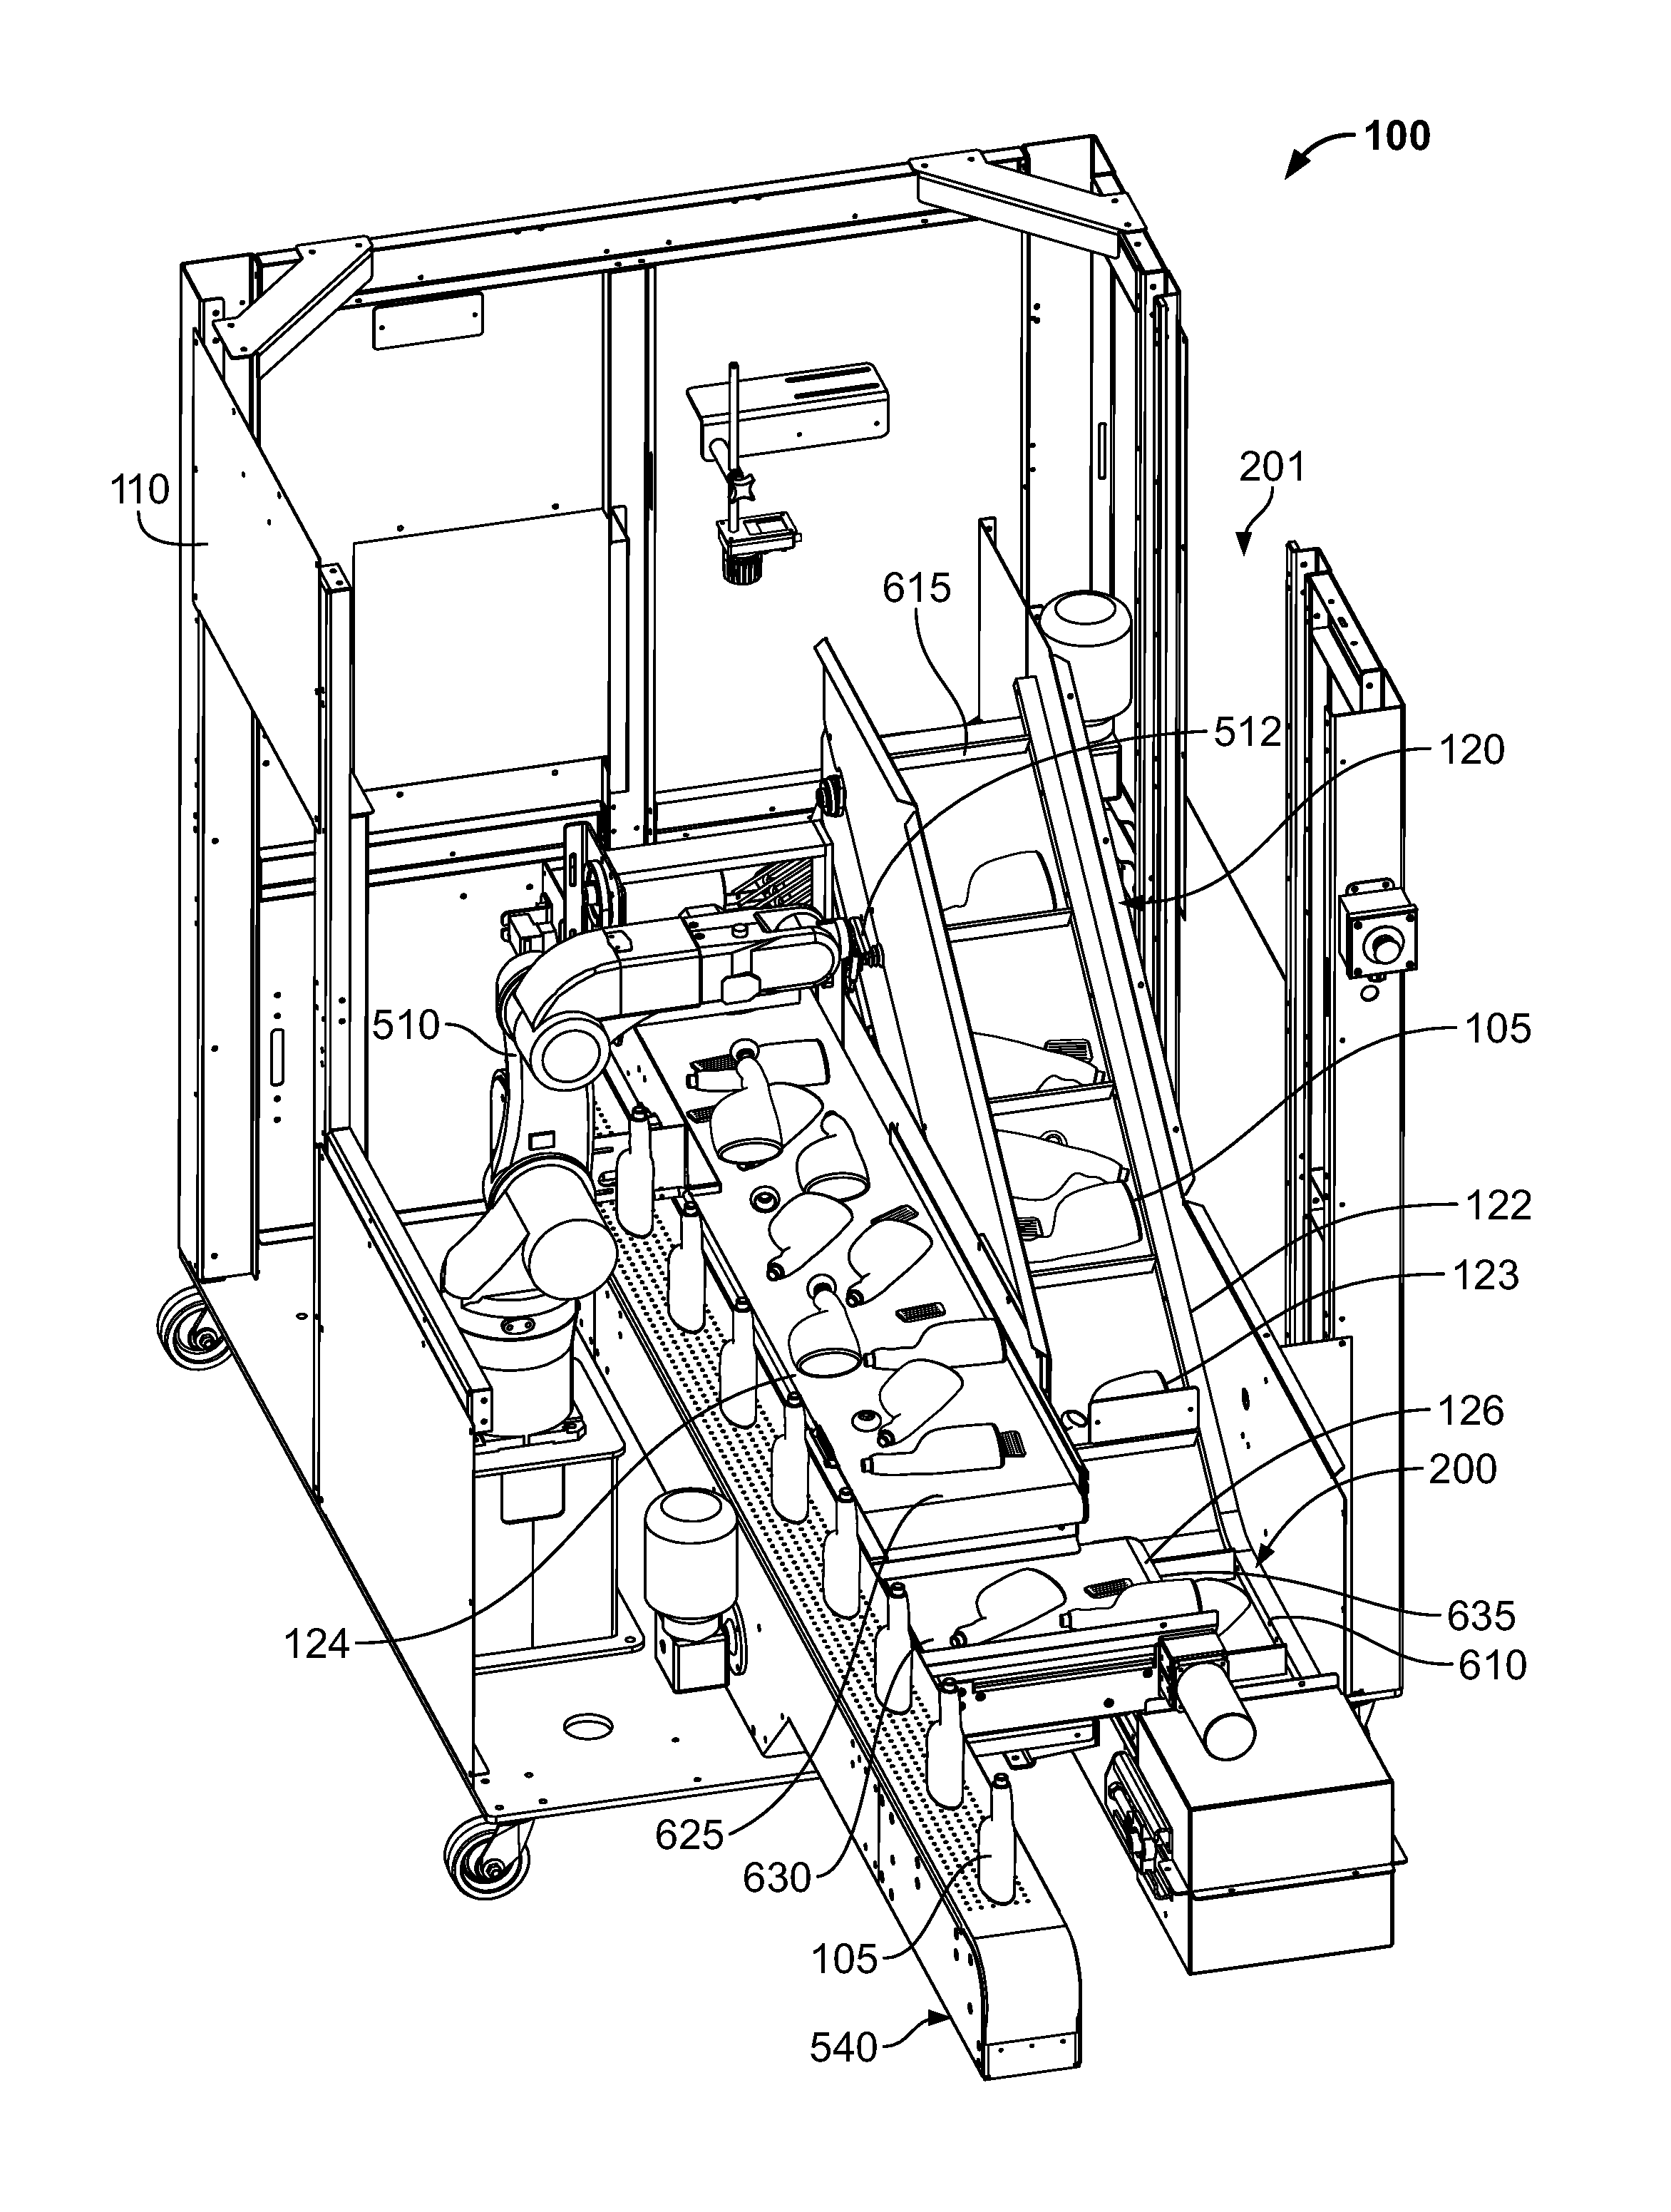 Apparatus and method for inspecting and orienting articles